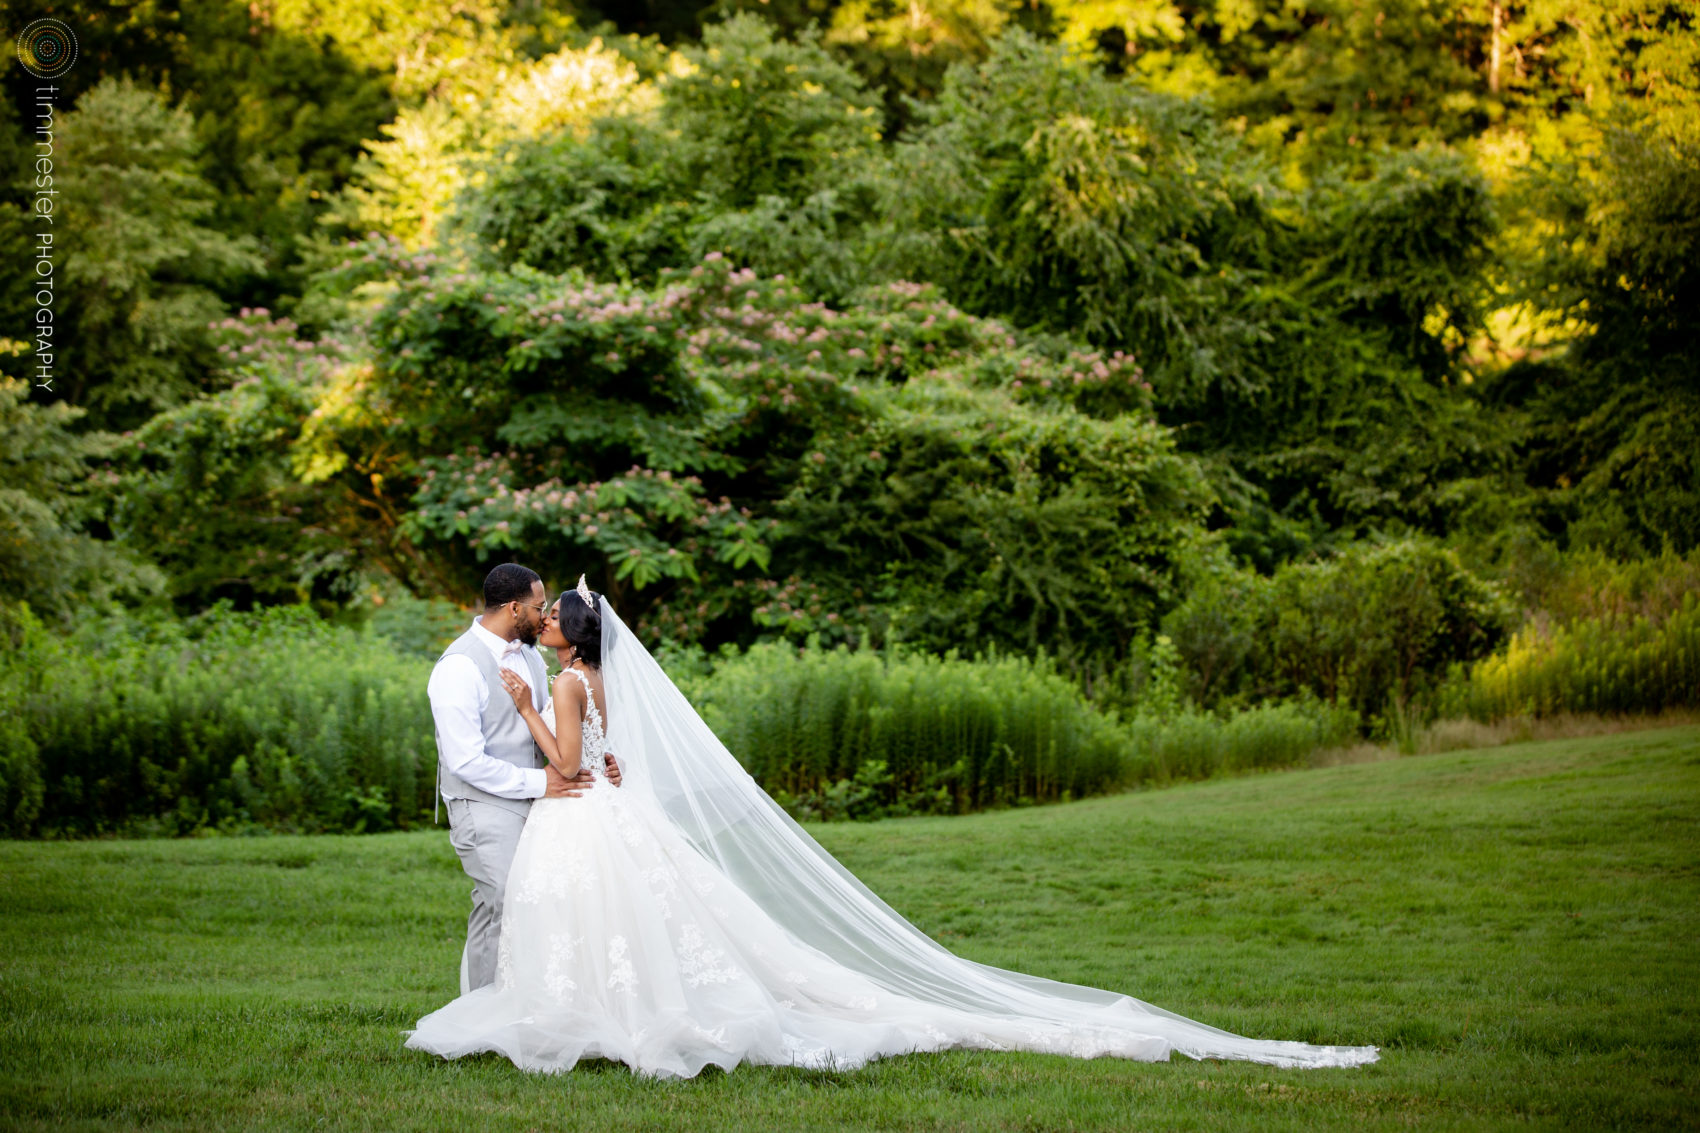 A beautiful wedding and couple portraits at Highgrove Estate in Fuquay-Varina, NC.